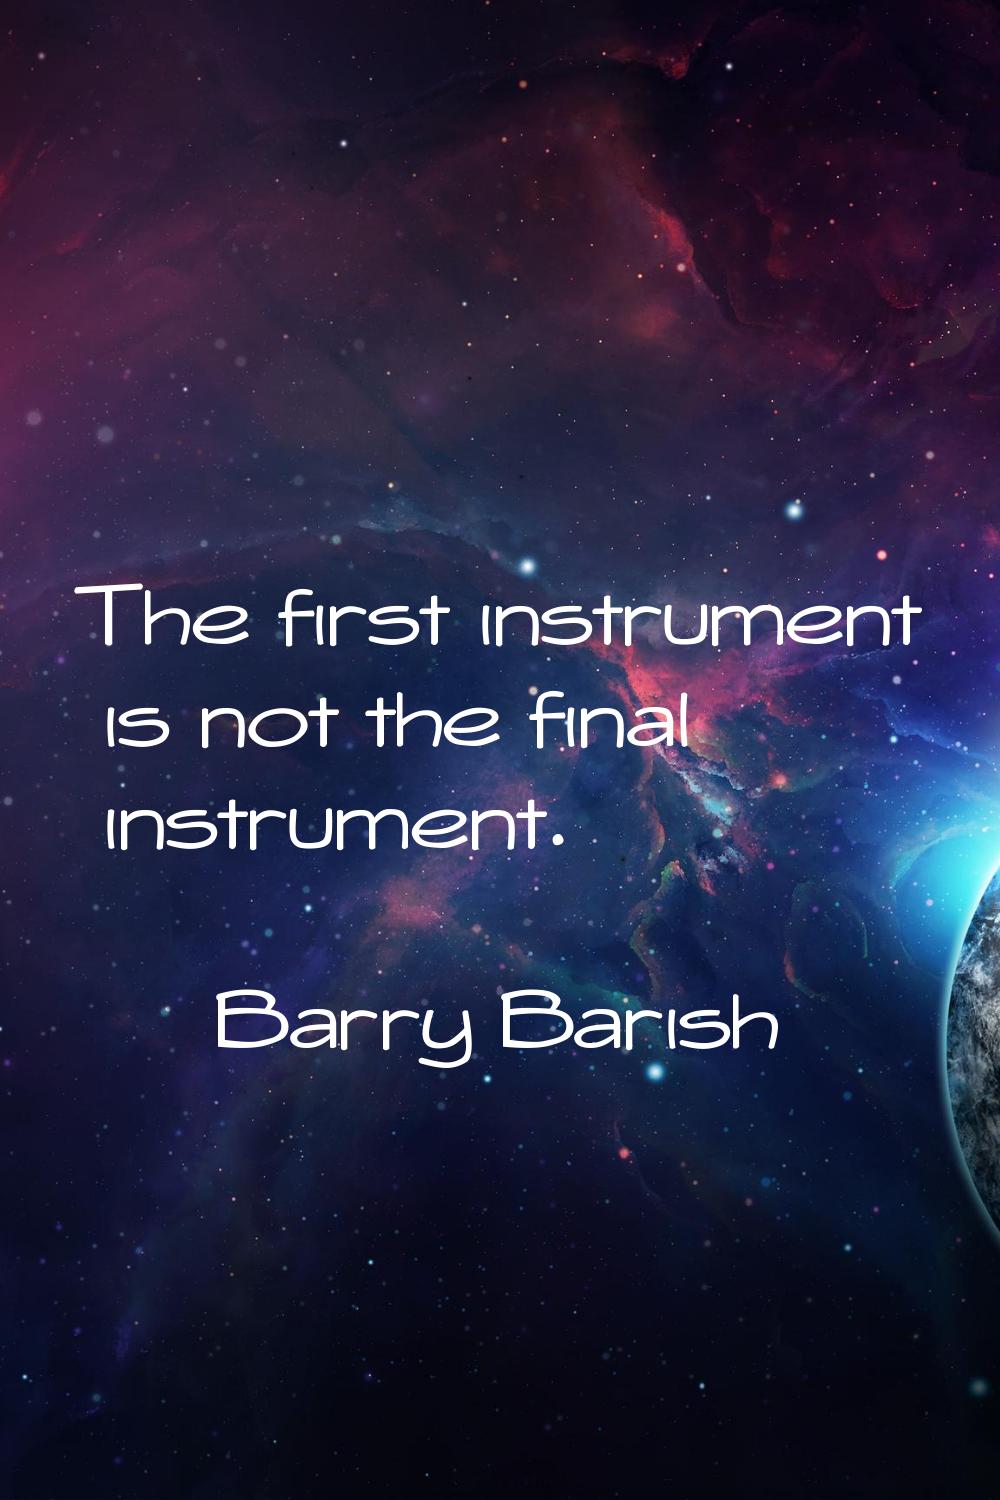 The first instrument is not the final instrument.